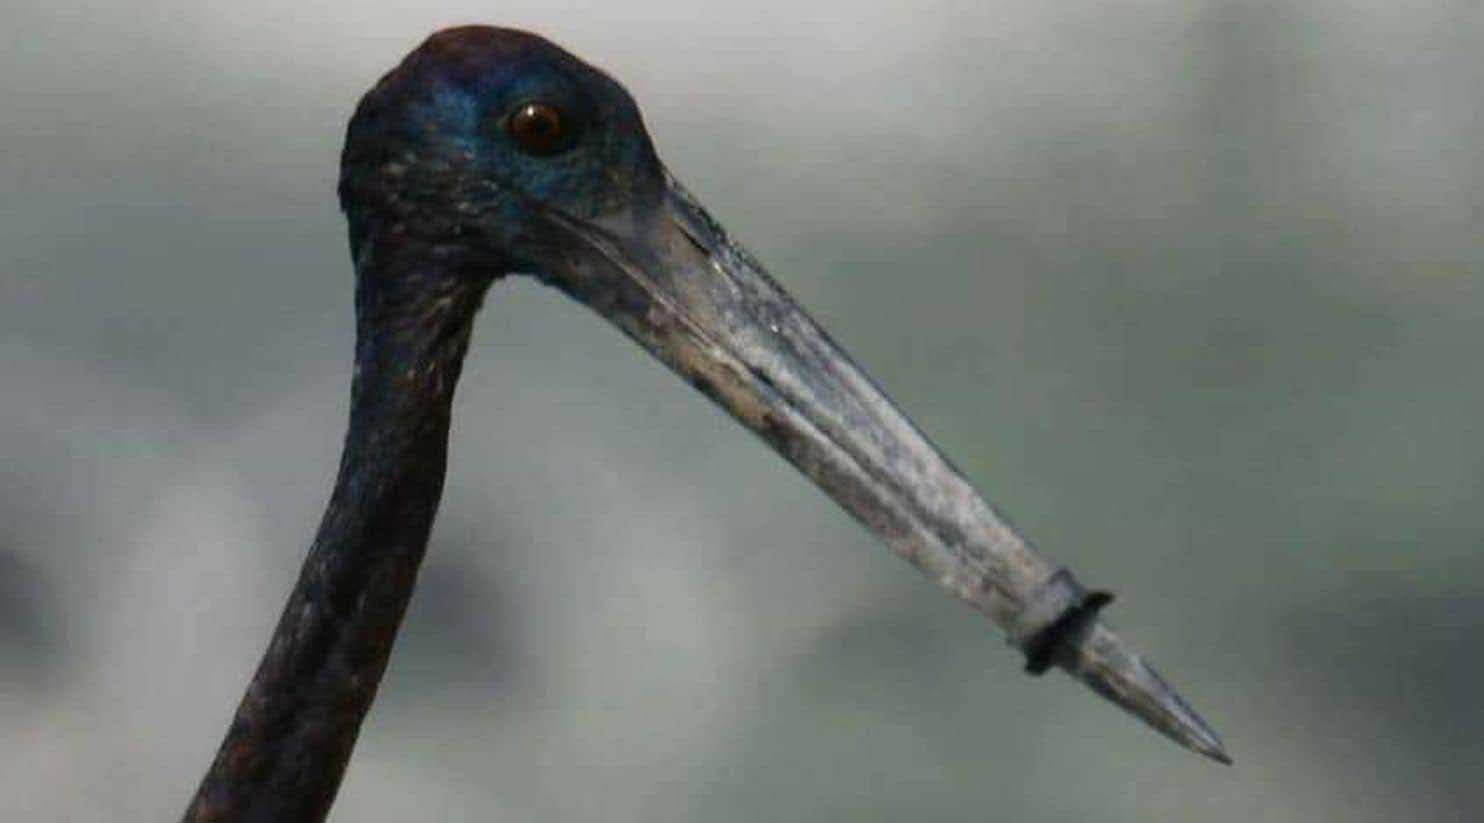 A stork with a ring around its beak is seen in Gurgaon India. Photo: Manoj Nair.